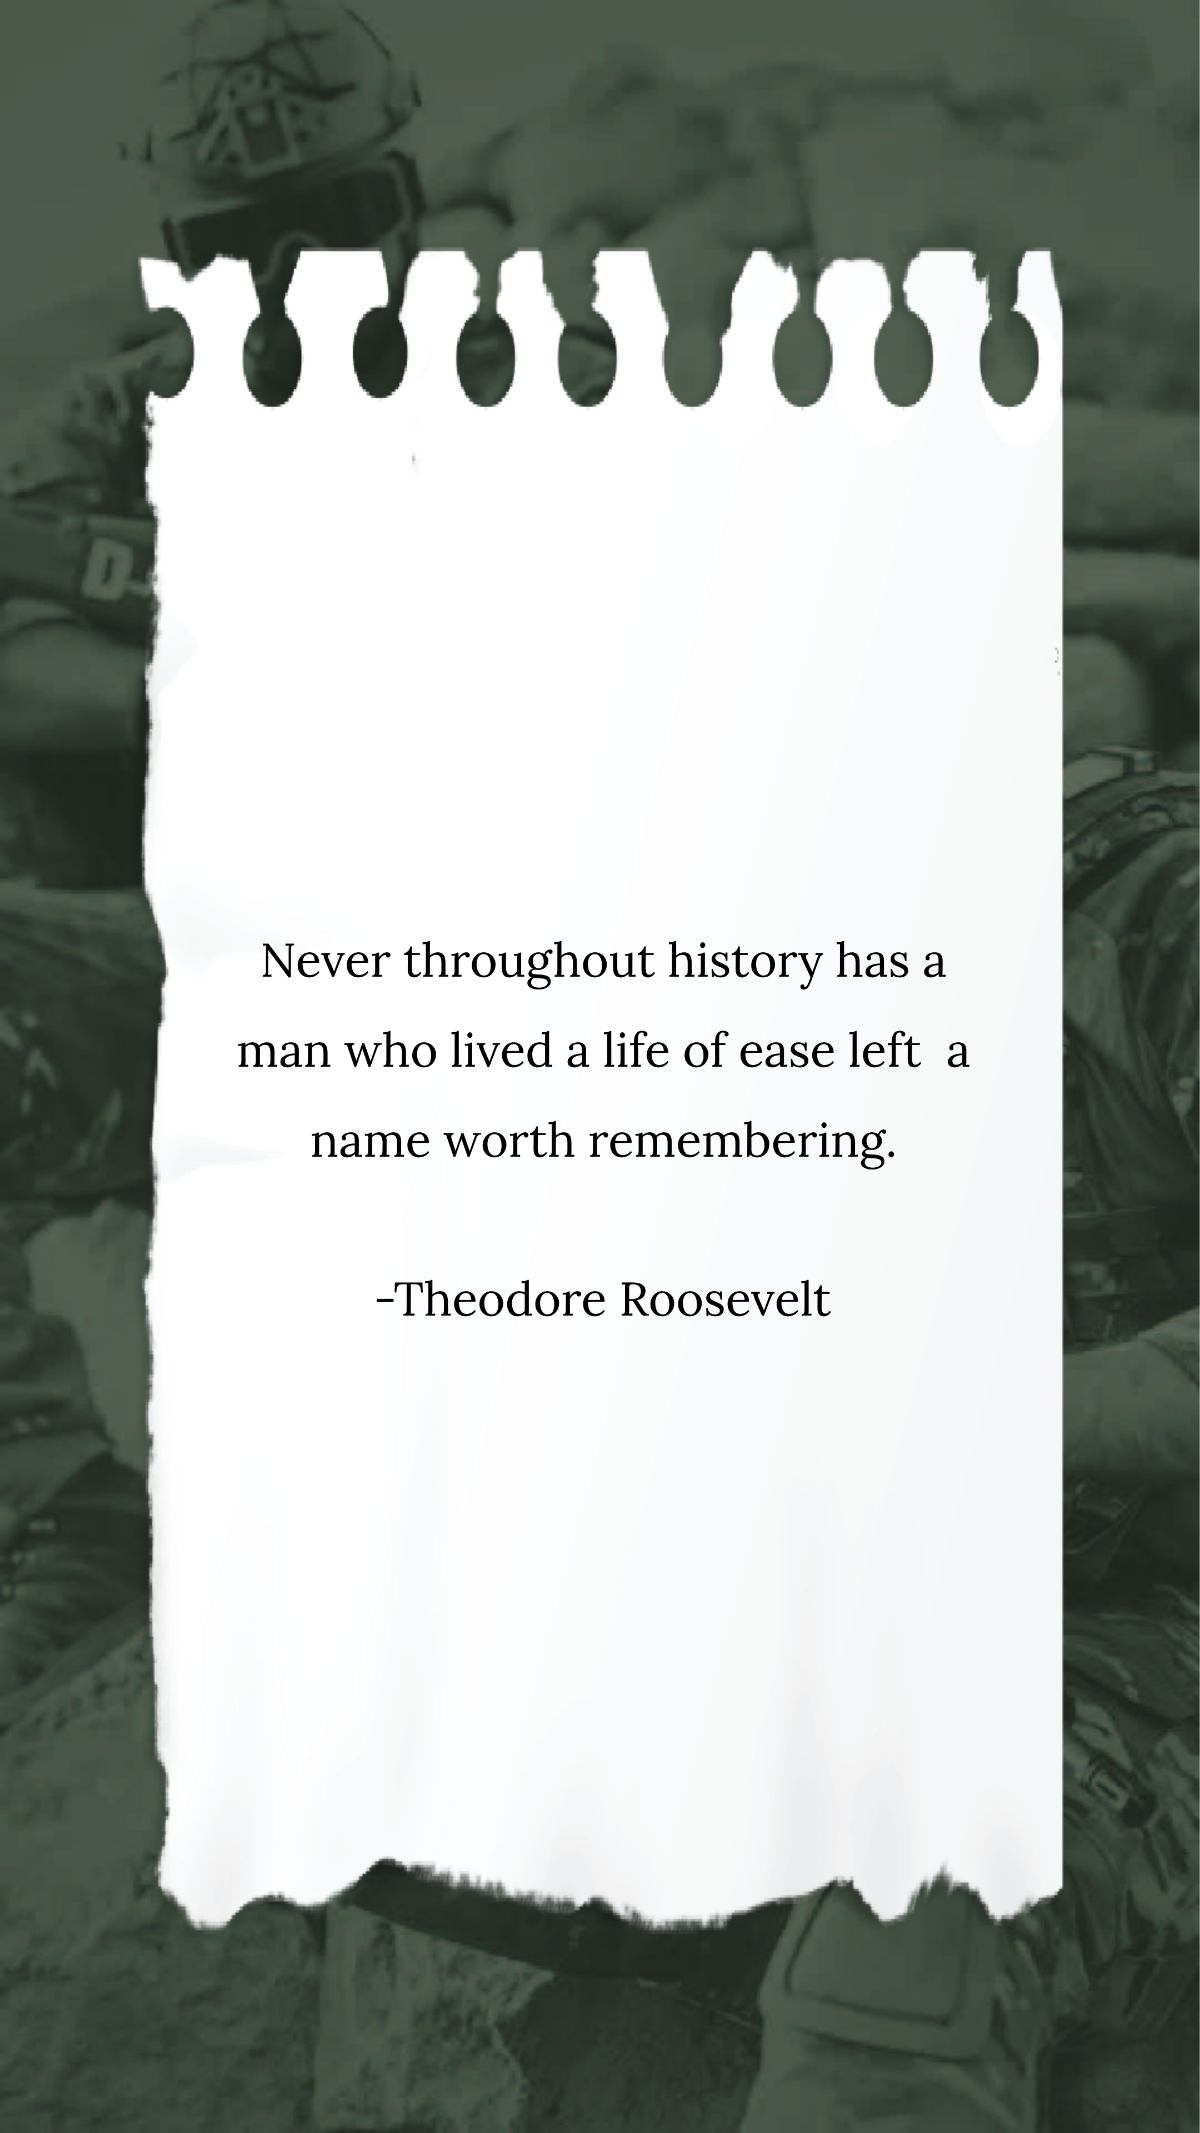 Theodore Roosevelt - Never throughout history has a man who lived a life of ease left a name worth remembering. Template